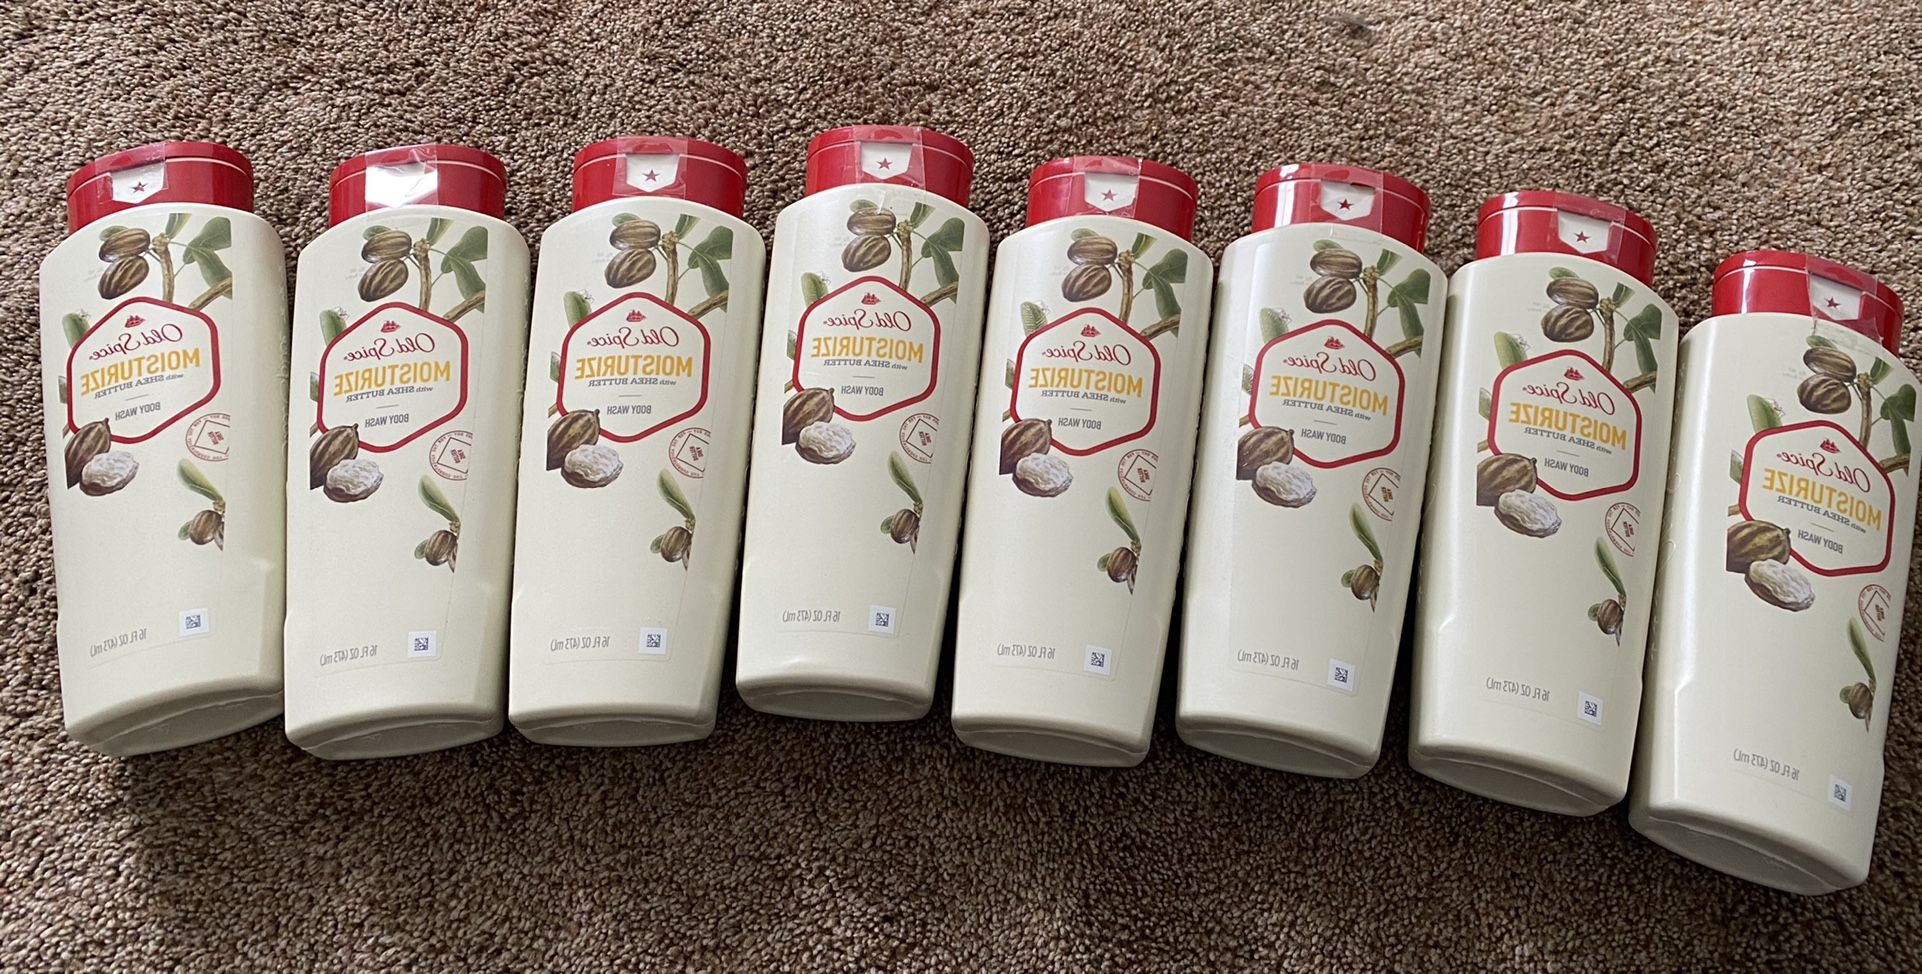 (8) Old Spice Body Wash Shea Butter 16oz